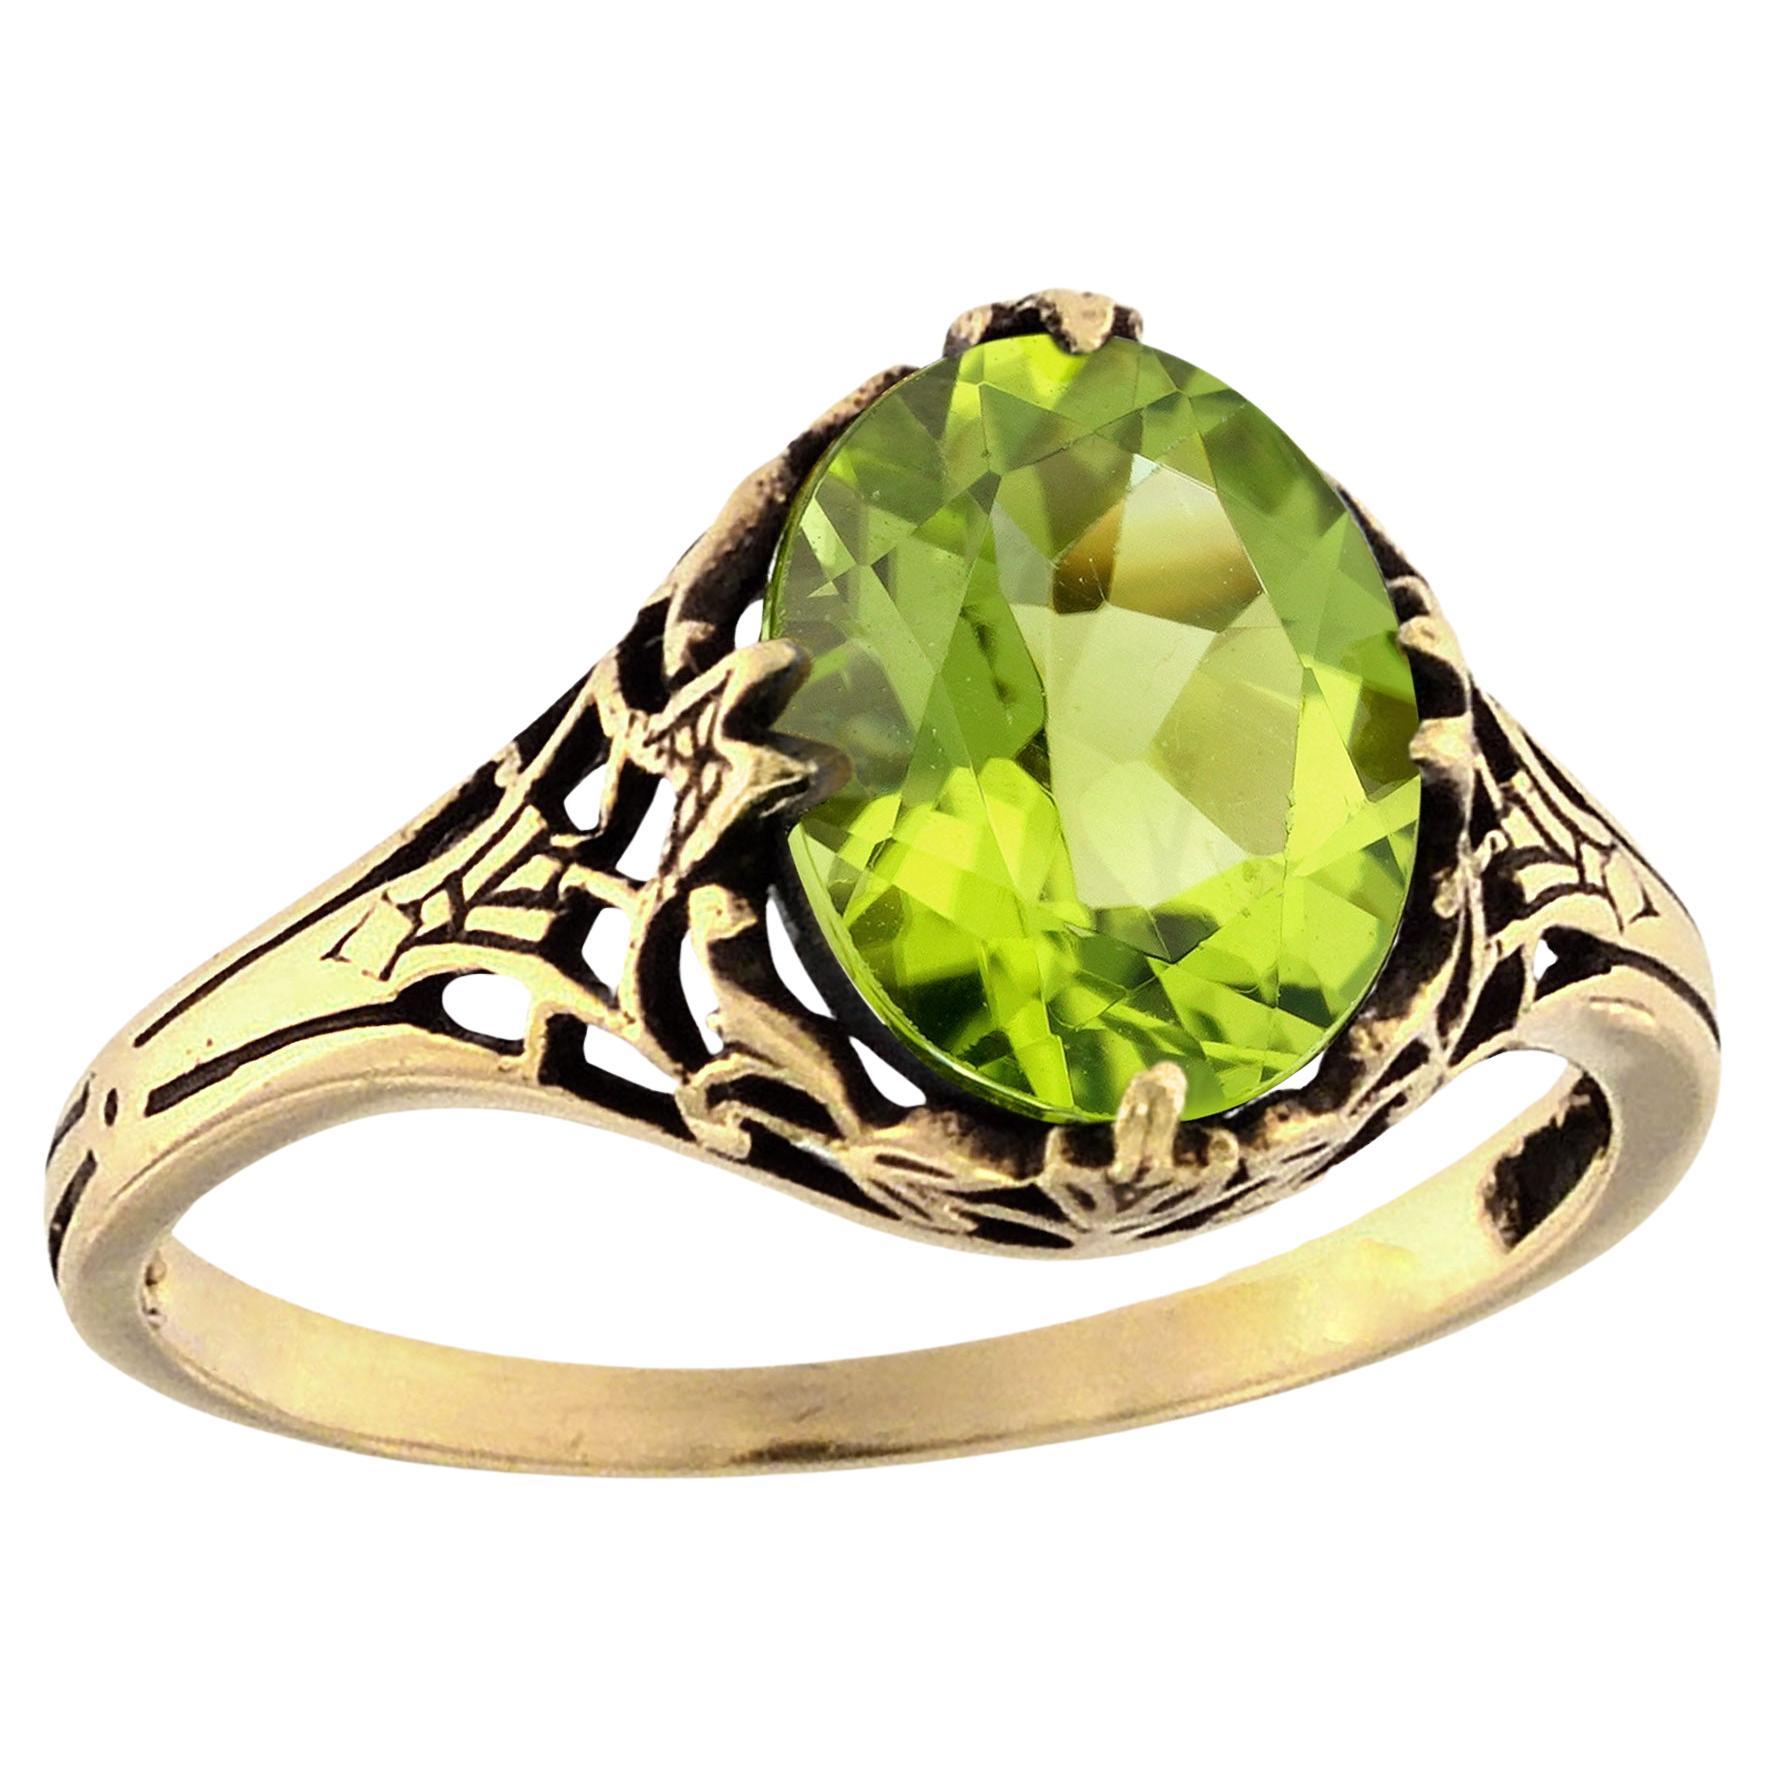 Natural Peridot Vintage Style Filigree Solitaire Ring in Solid 9K Yellow Gold